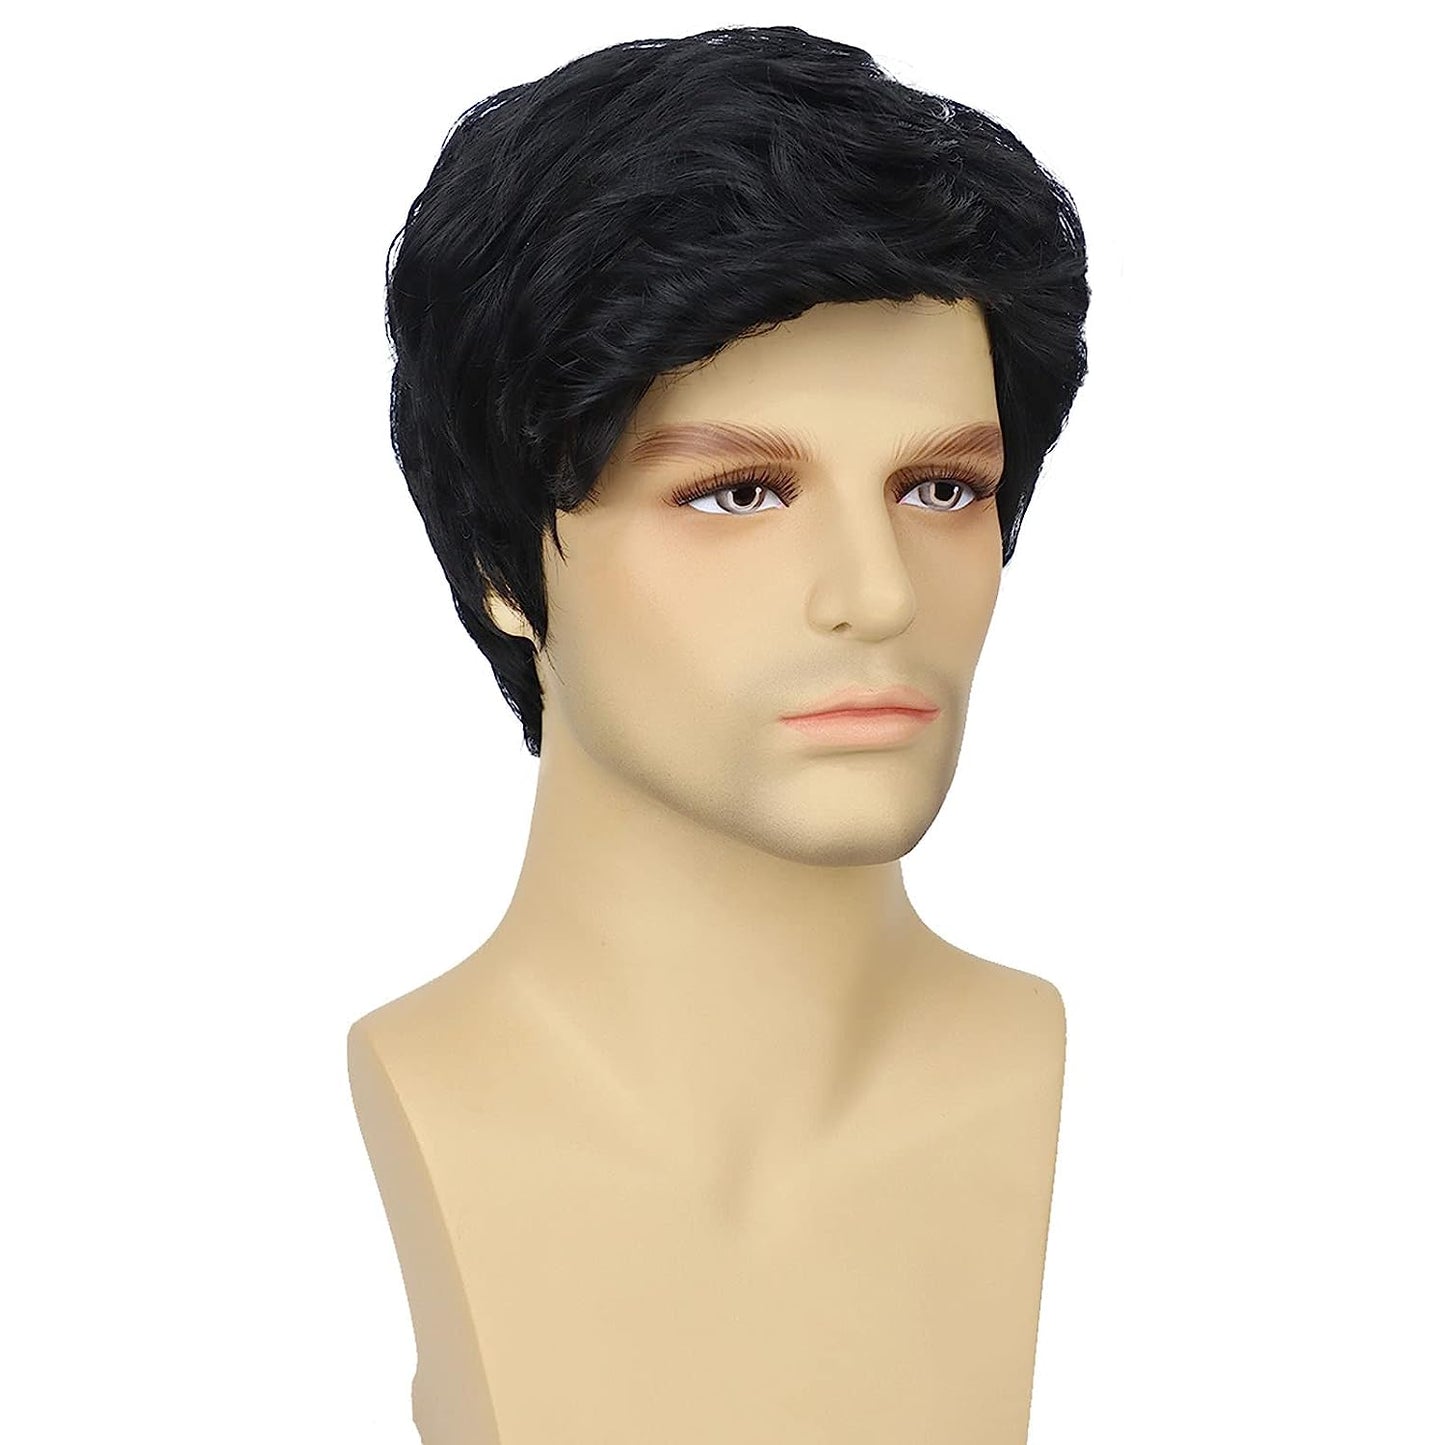 Lush Locks  Natural Black  Synthetic Hair Wig for Men and boys